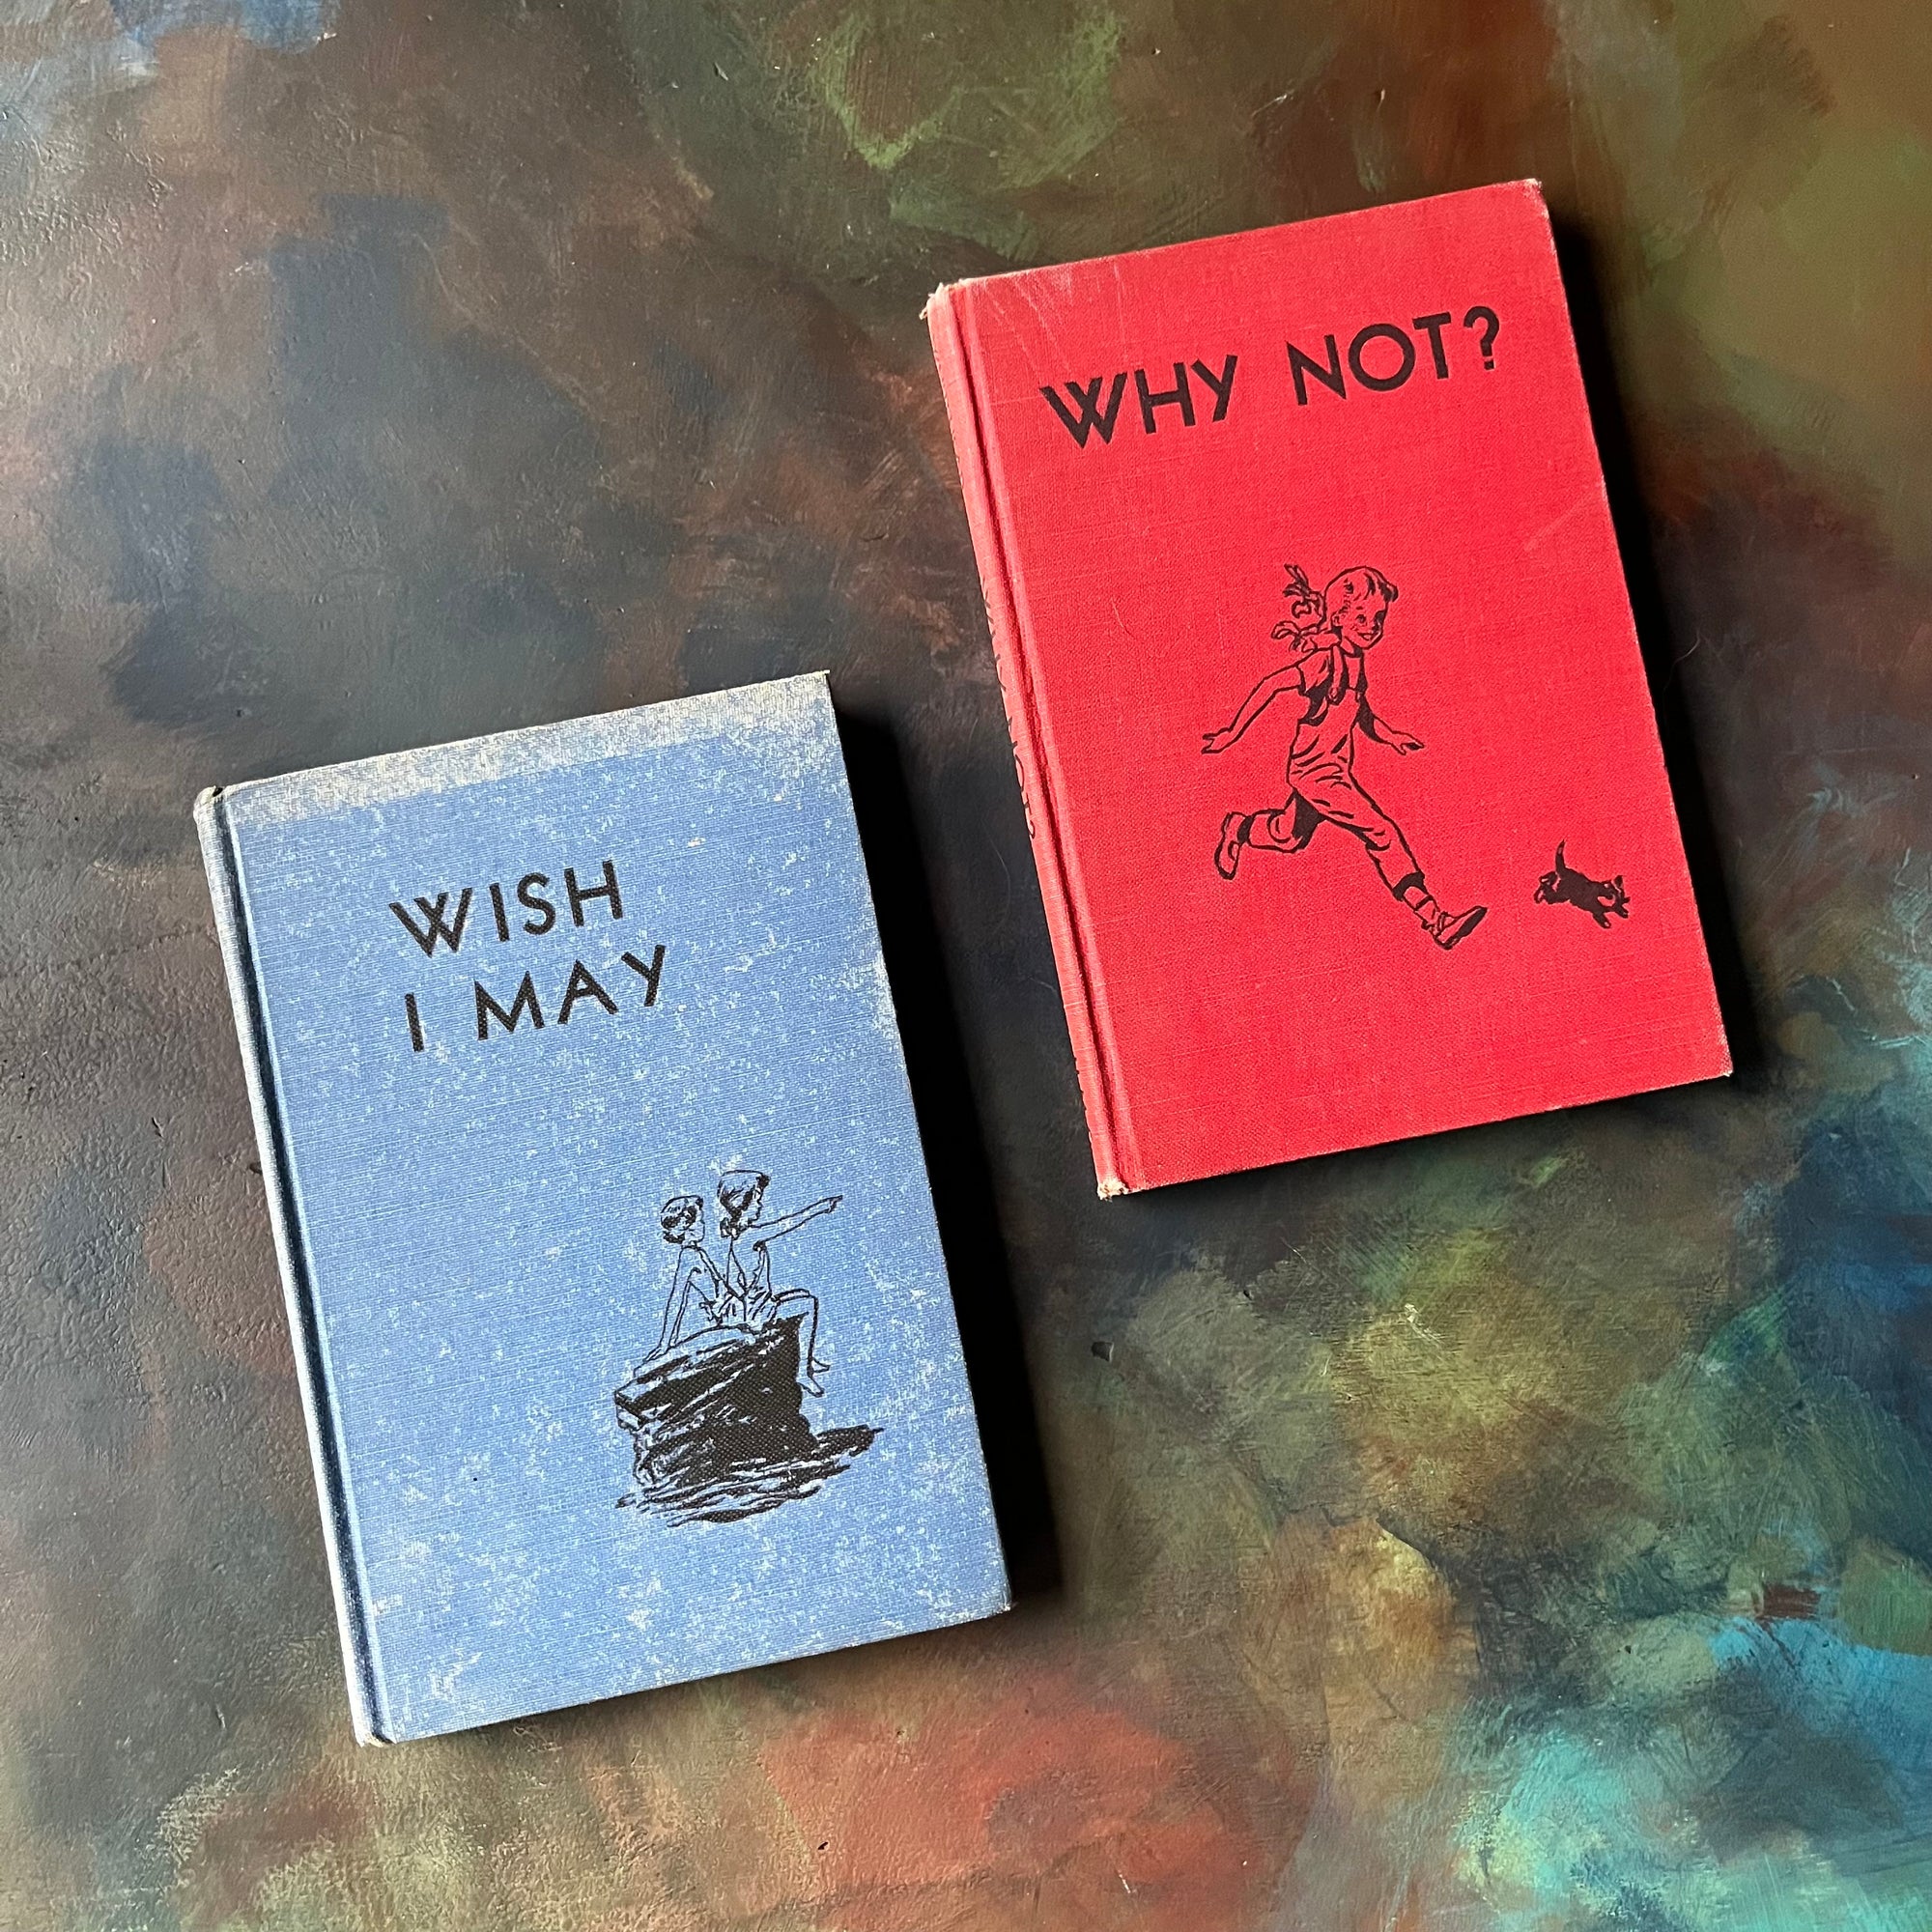 Pair of books written by Roberta Whitehead-Wish I May and Why Not? Written by Roberta Whitehead with illustrations by William Moyers-vintage children's chapter books-view of the front covers in blue & red